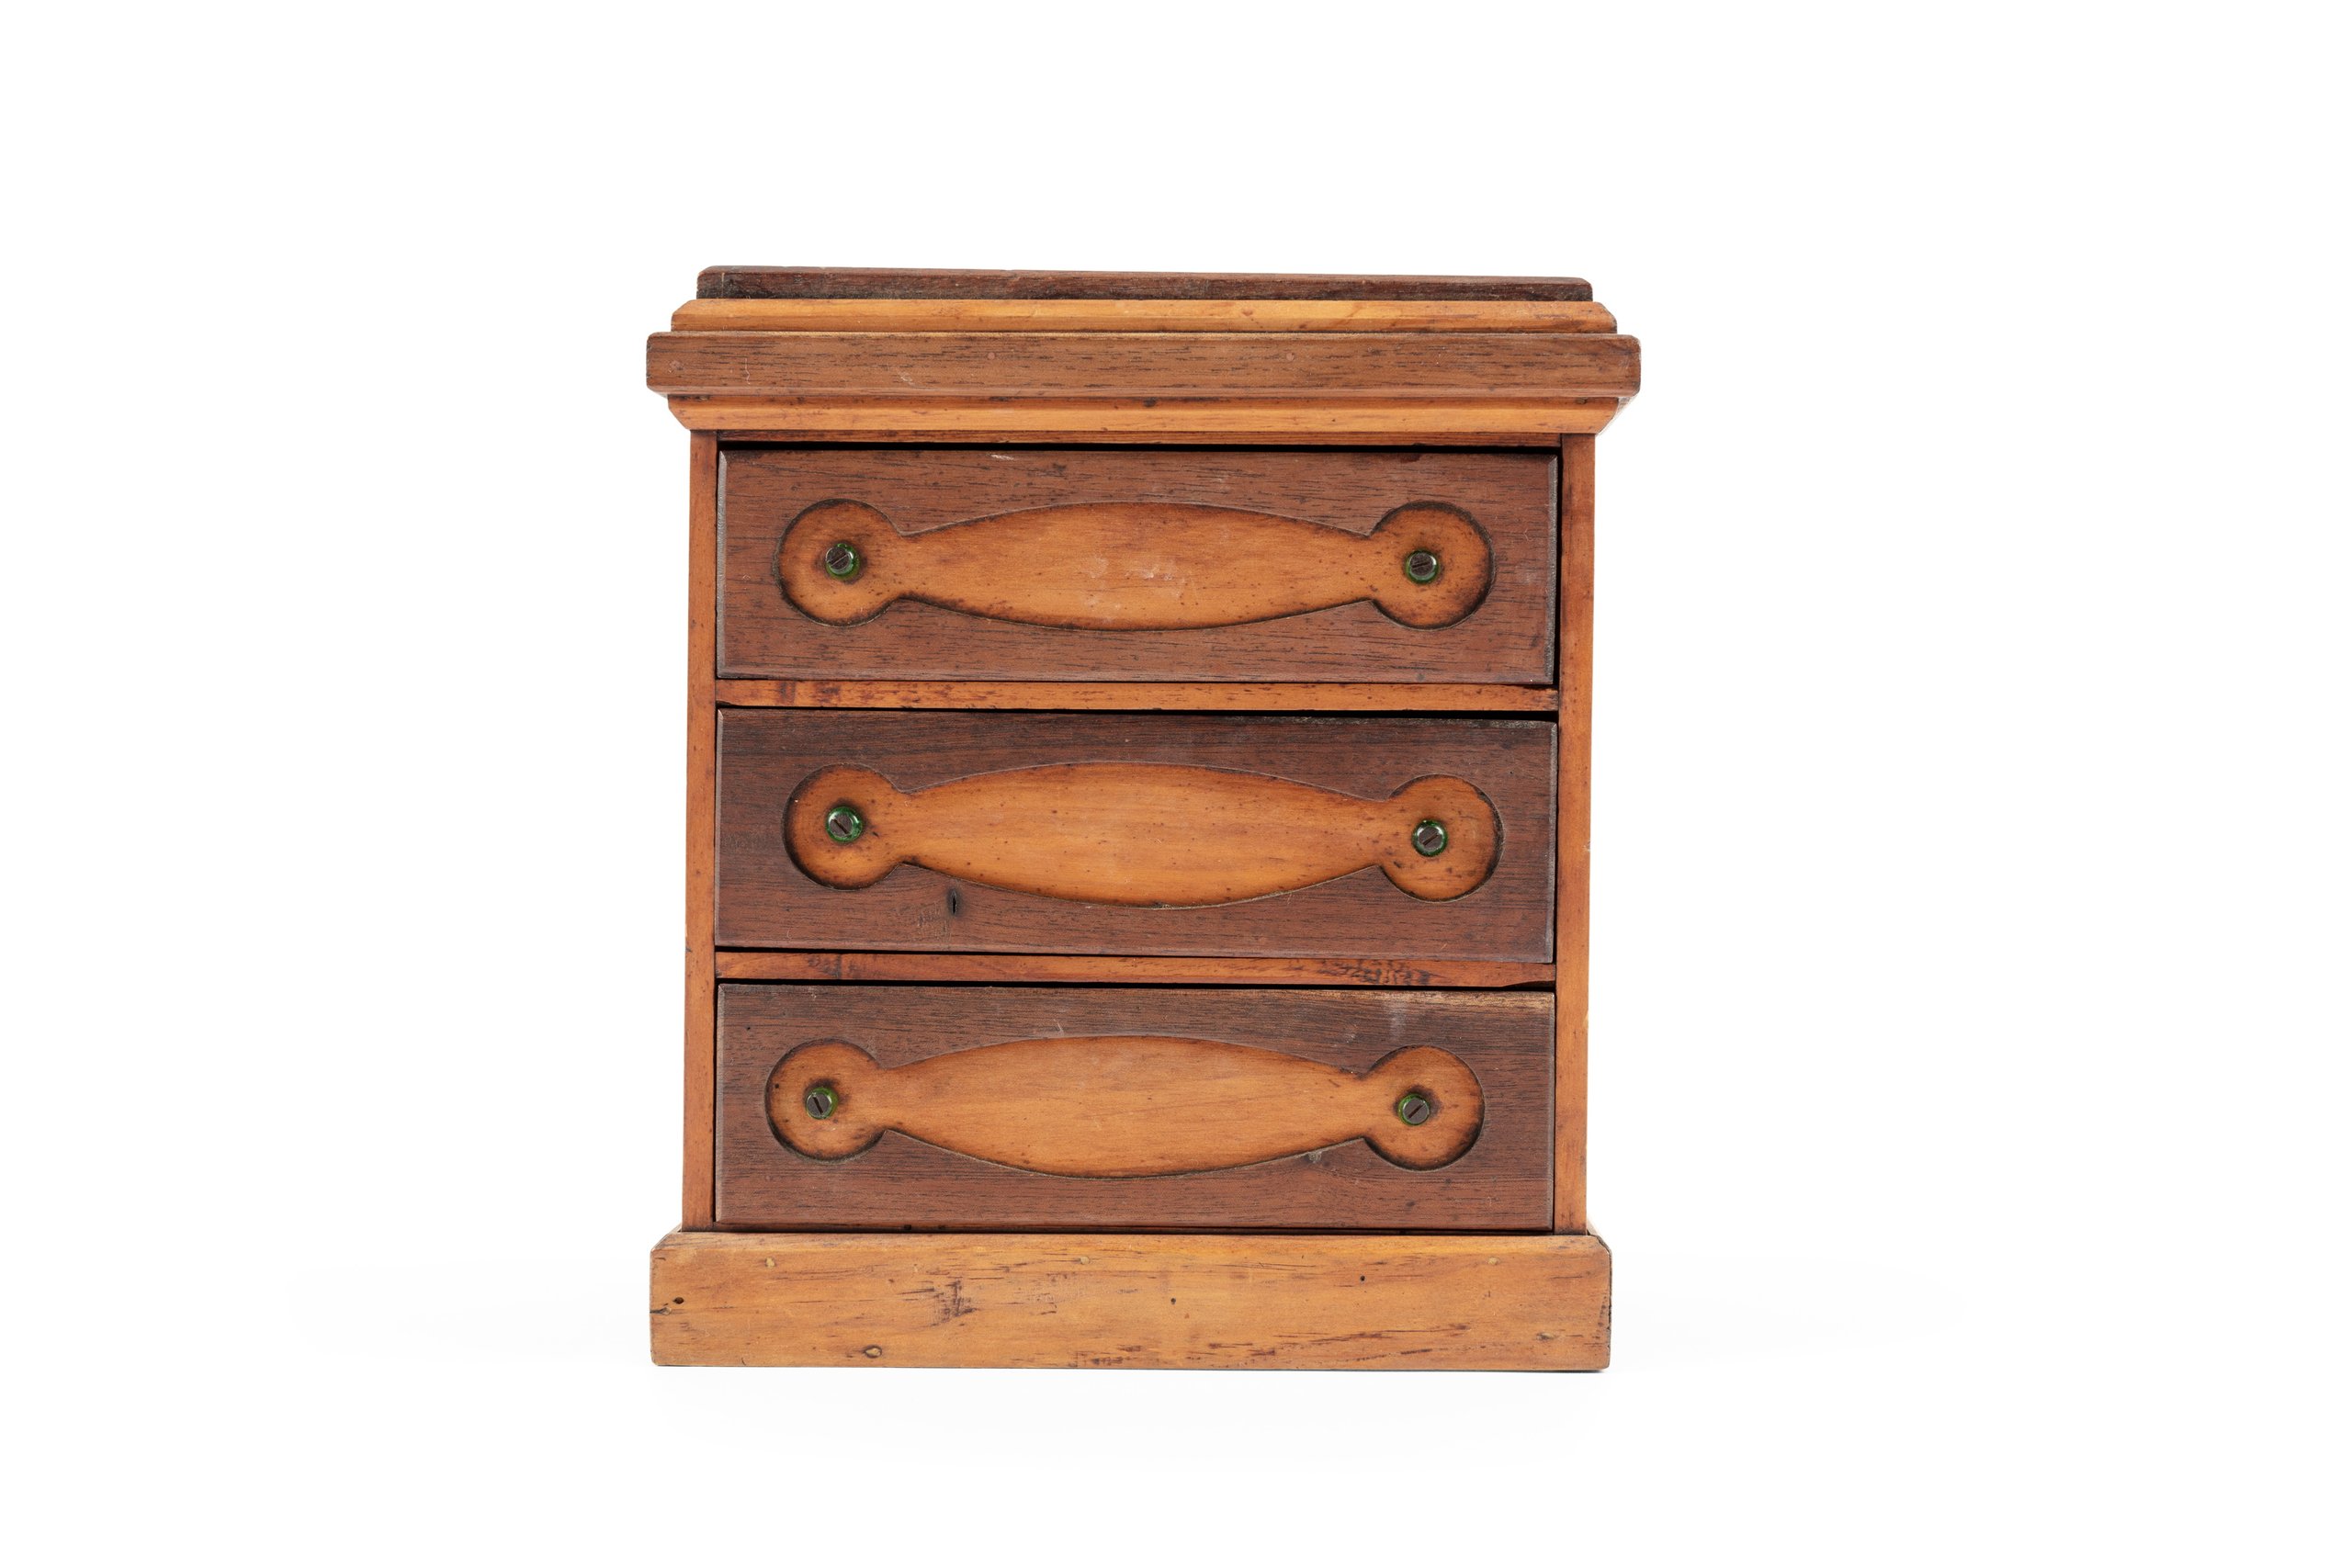 Toy chest of drawers by John Stark